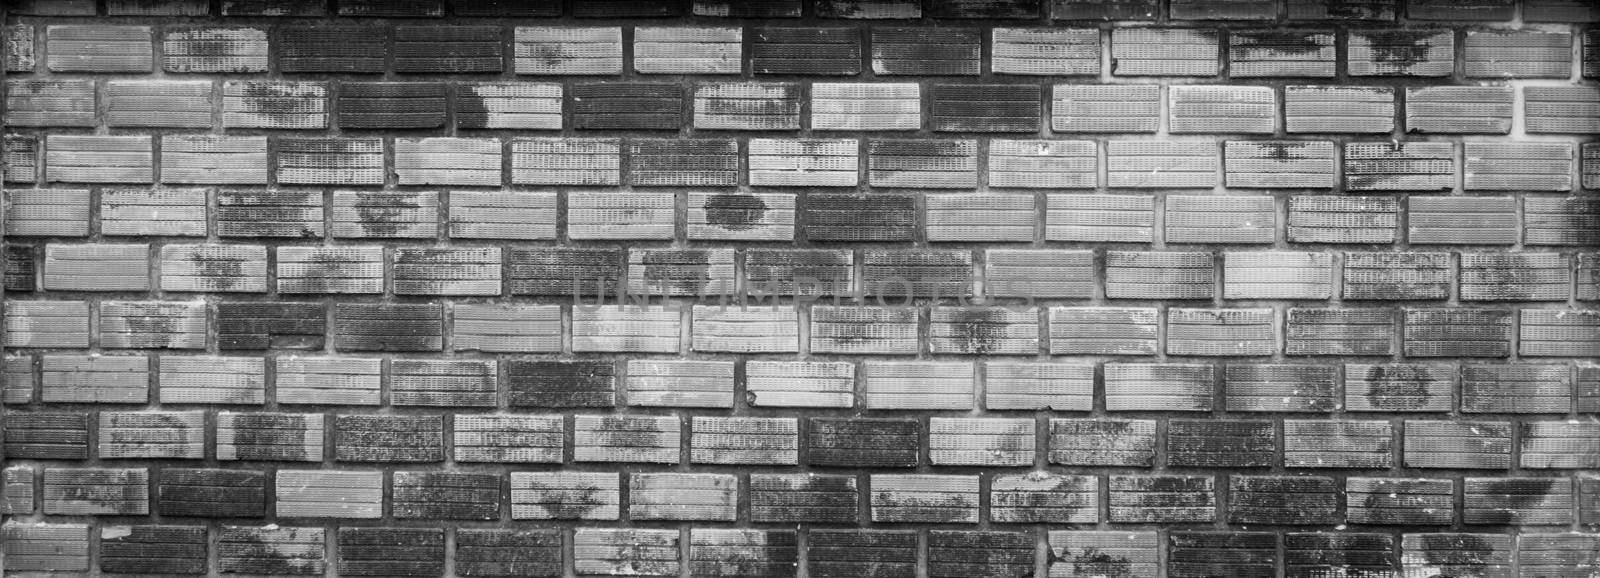 Black and white of old brick wall texture background.